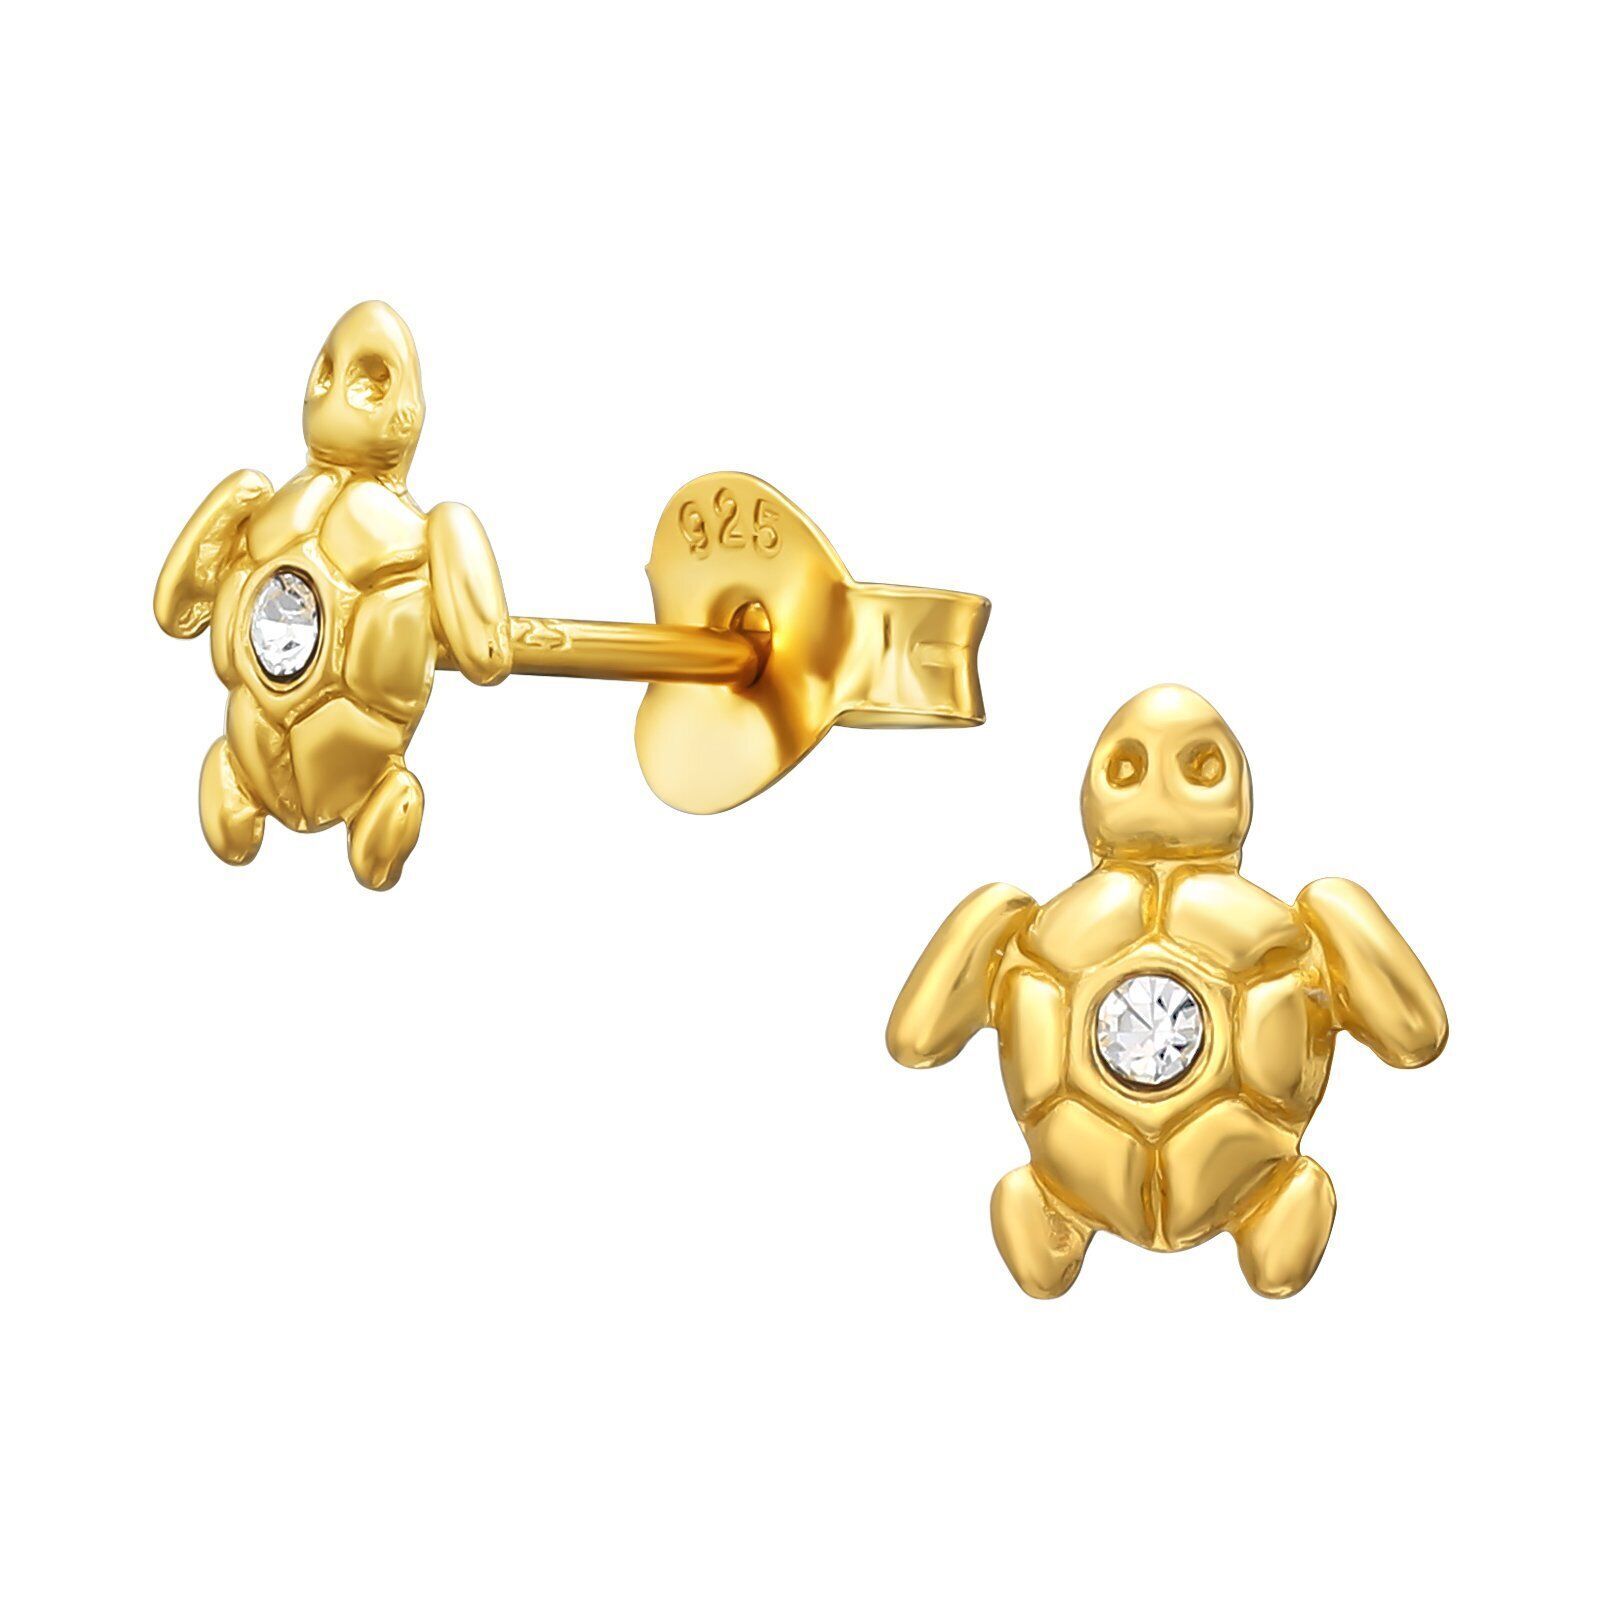 Primary image for Turtle Earrings 925 Silver Stud Earrings Gold Plated with Crystals